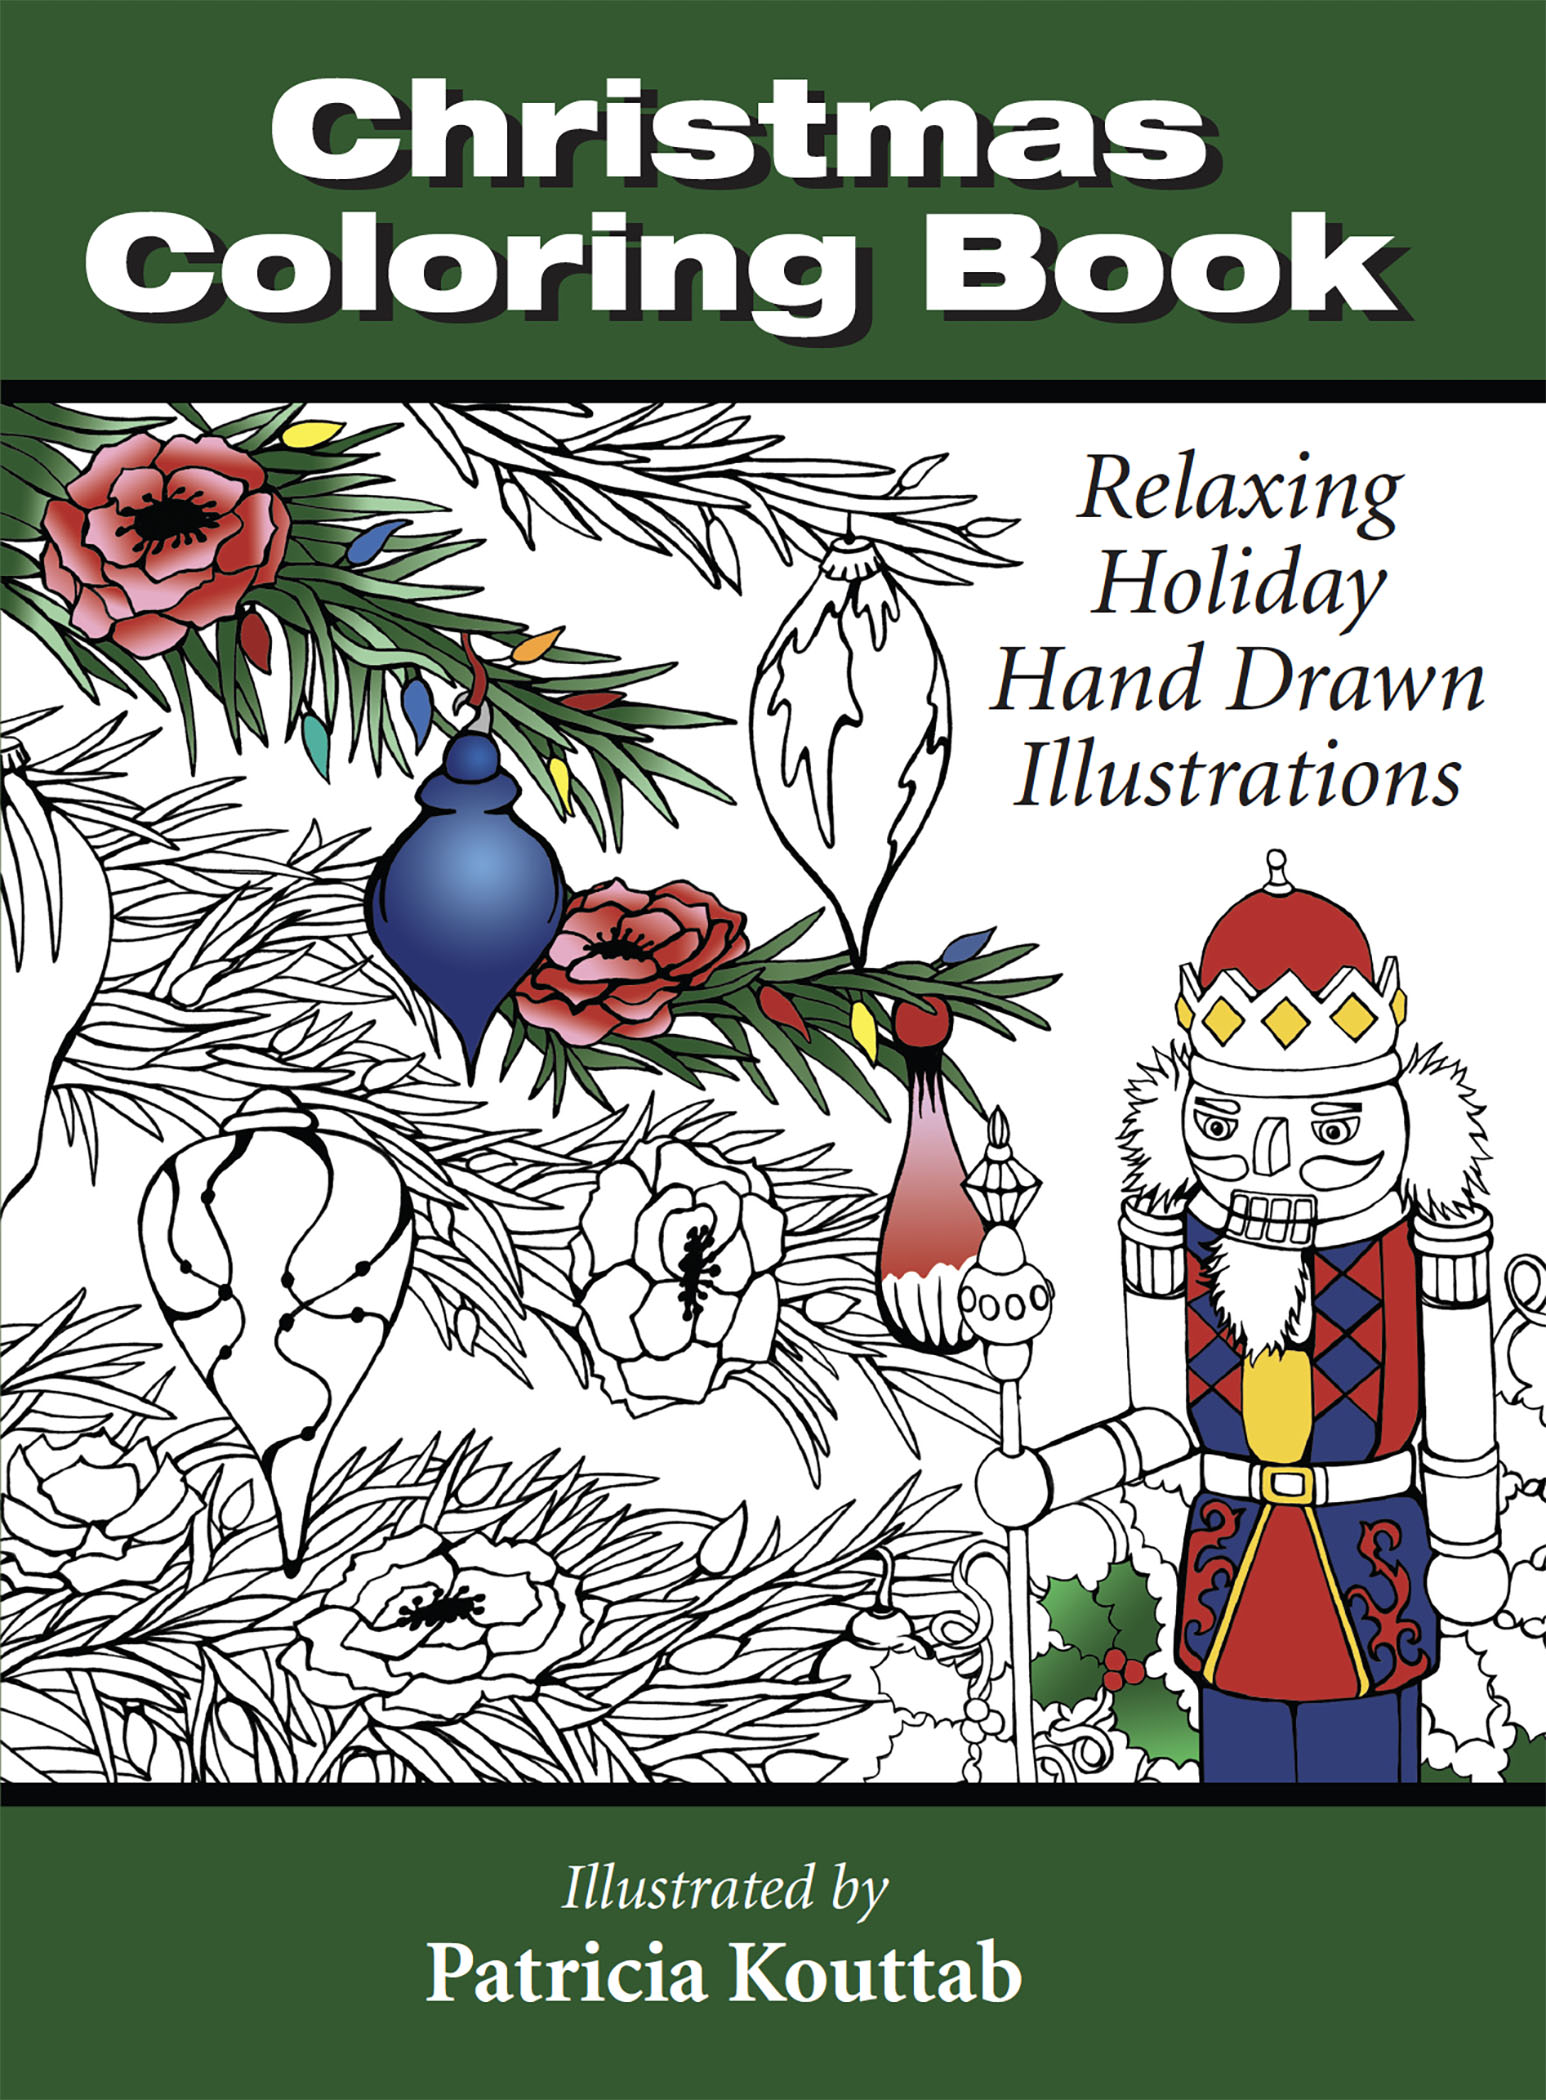 A Relaxing Christmas Coloring Book